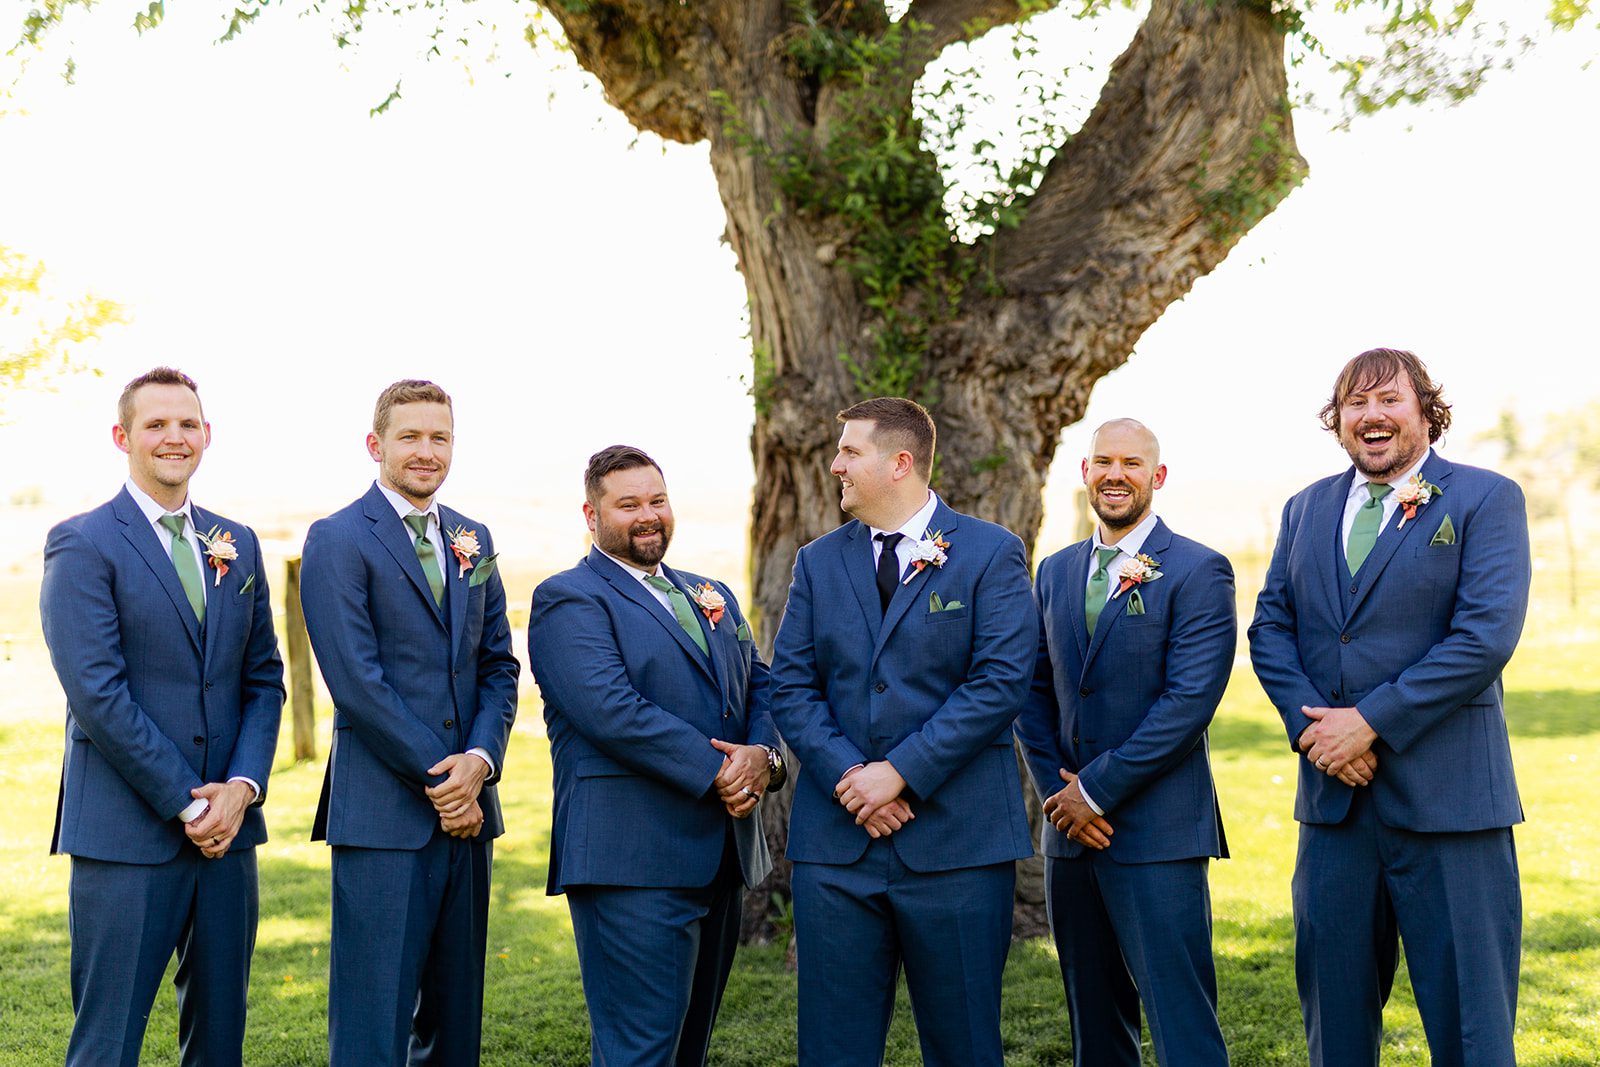 Bridal party photos, lings moment wedding flowers, fake wedding flowers, Shupe Homestead wedding, groomsmen suits, navy groomsmen